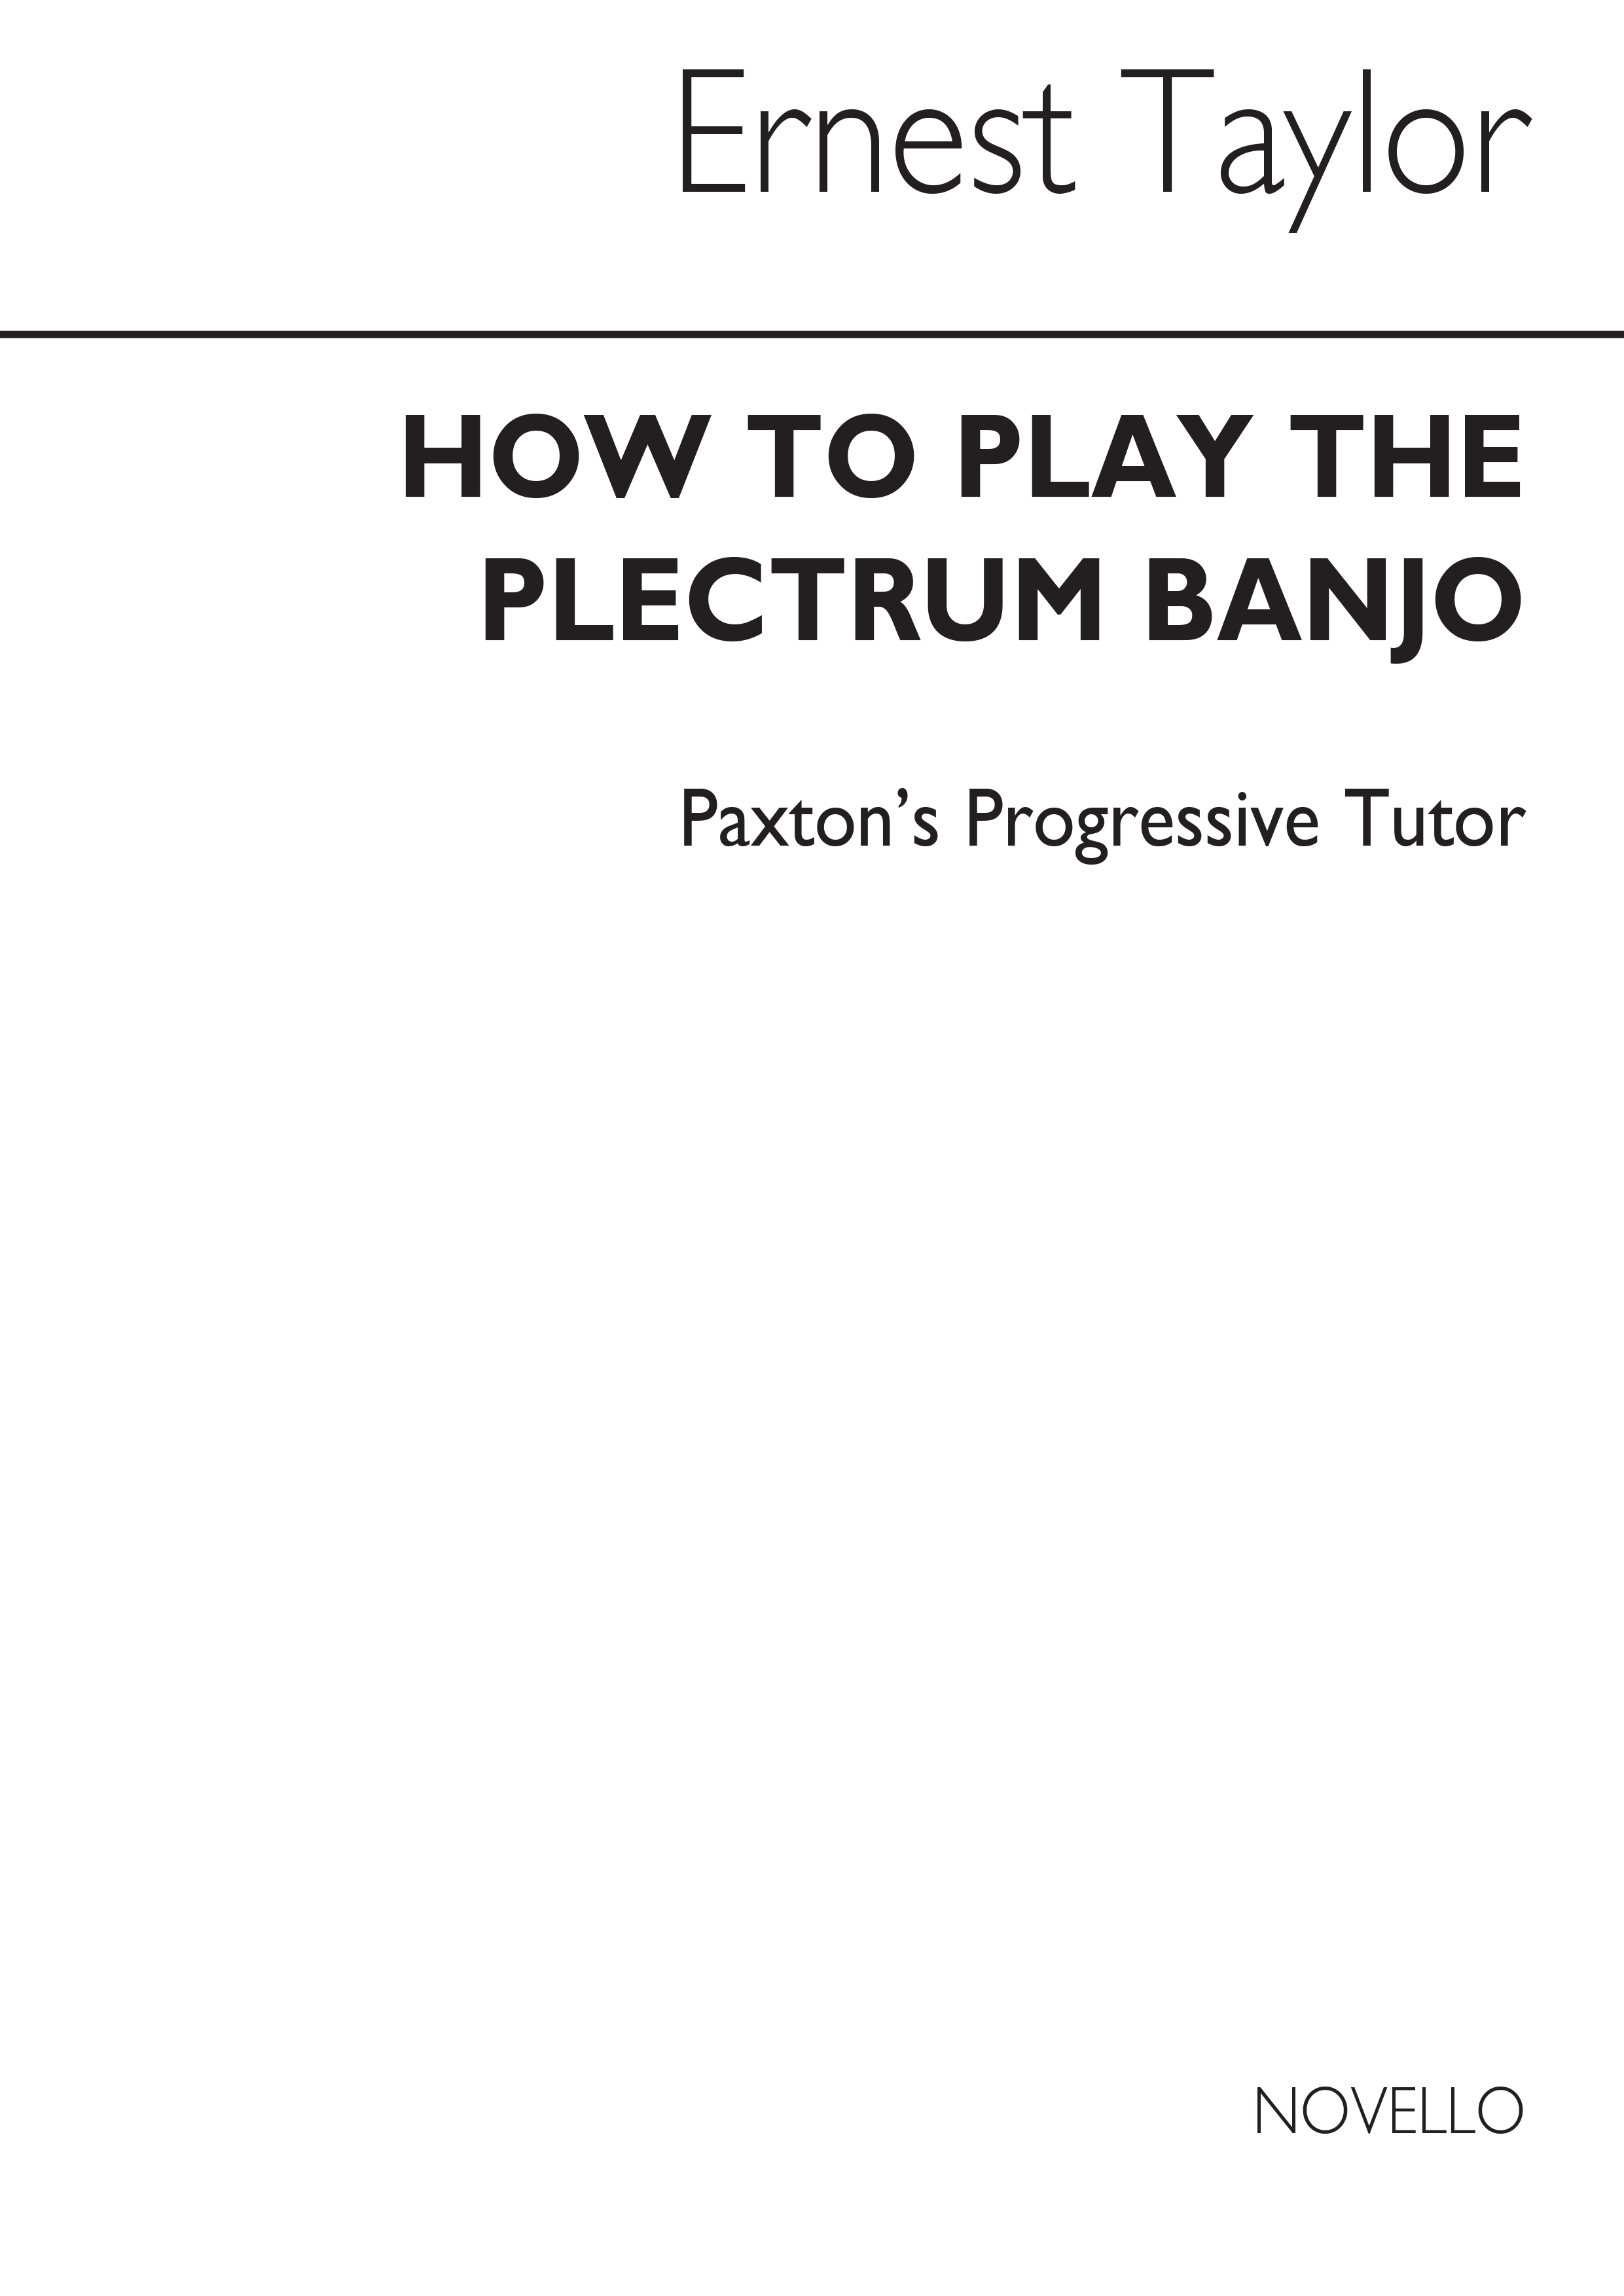 Ernest Taylor: How To Play The Plectrum Banjo - Paxton's Progressive Tutor